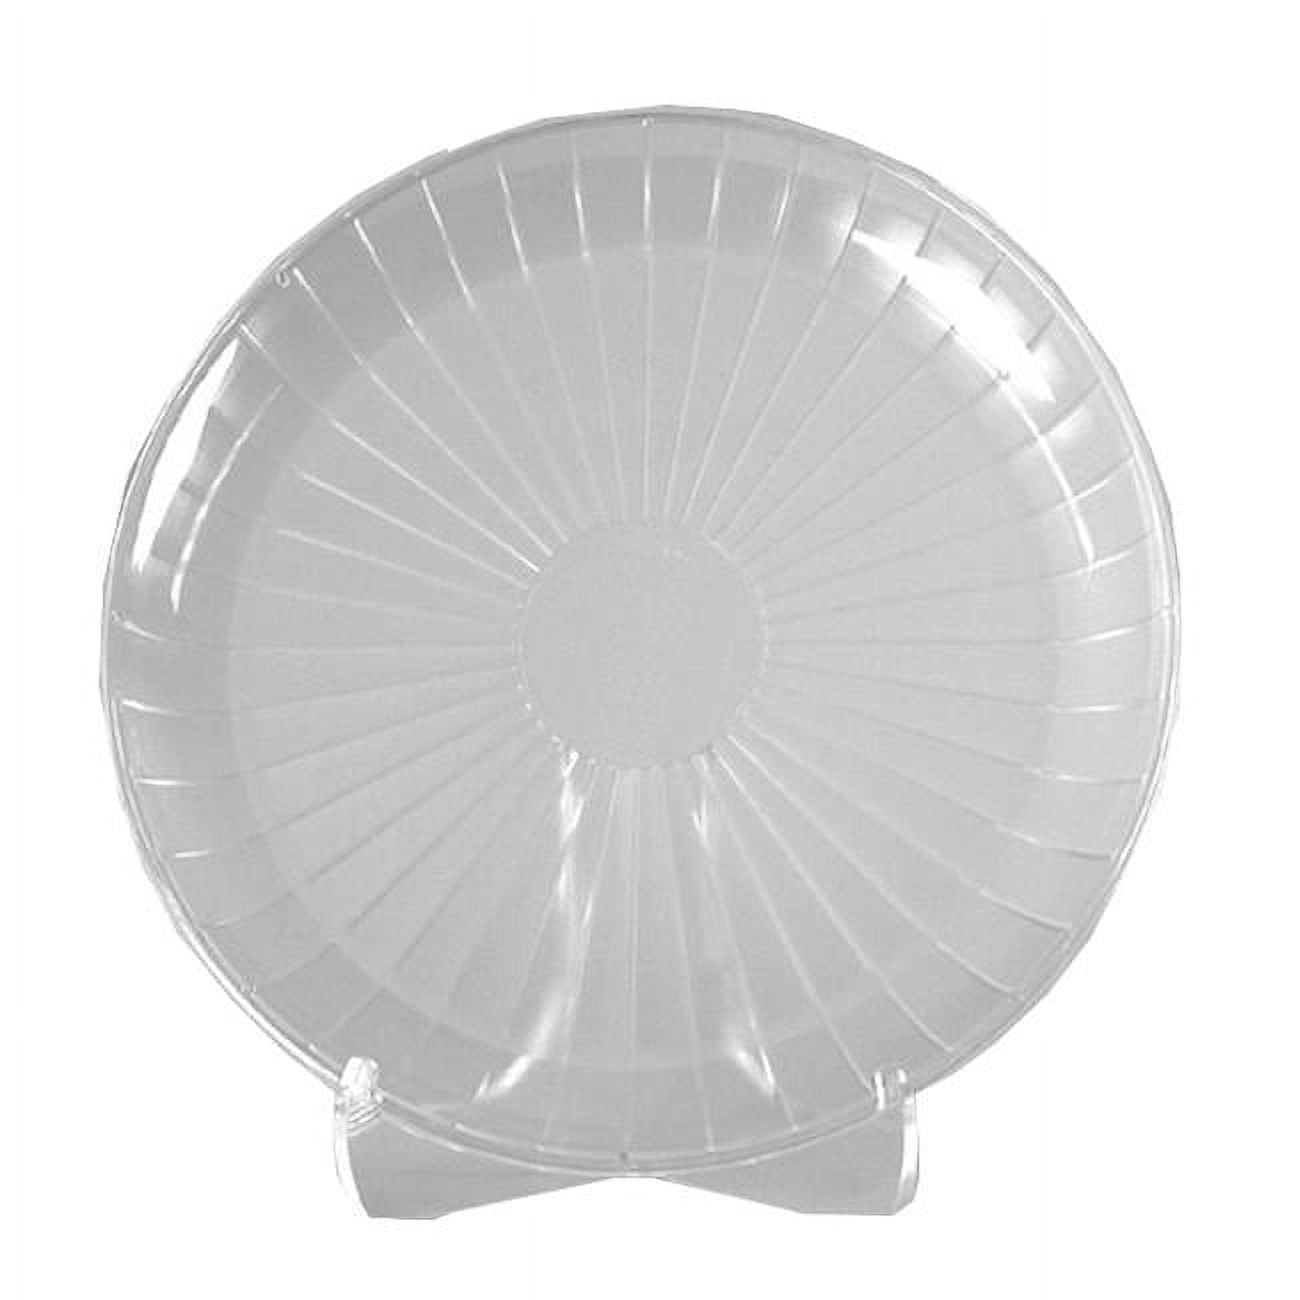 A712pcl25 Pec 12 In. Round Catering Tray, Clear